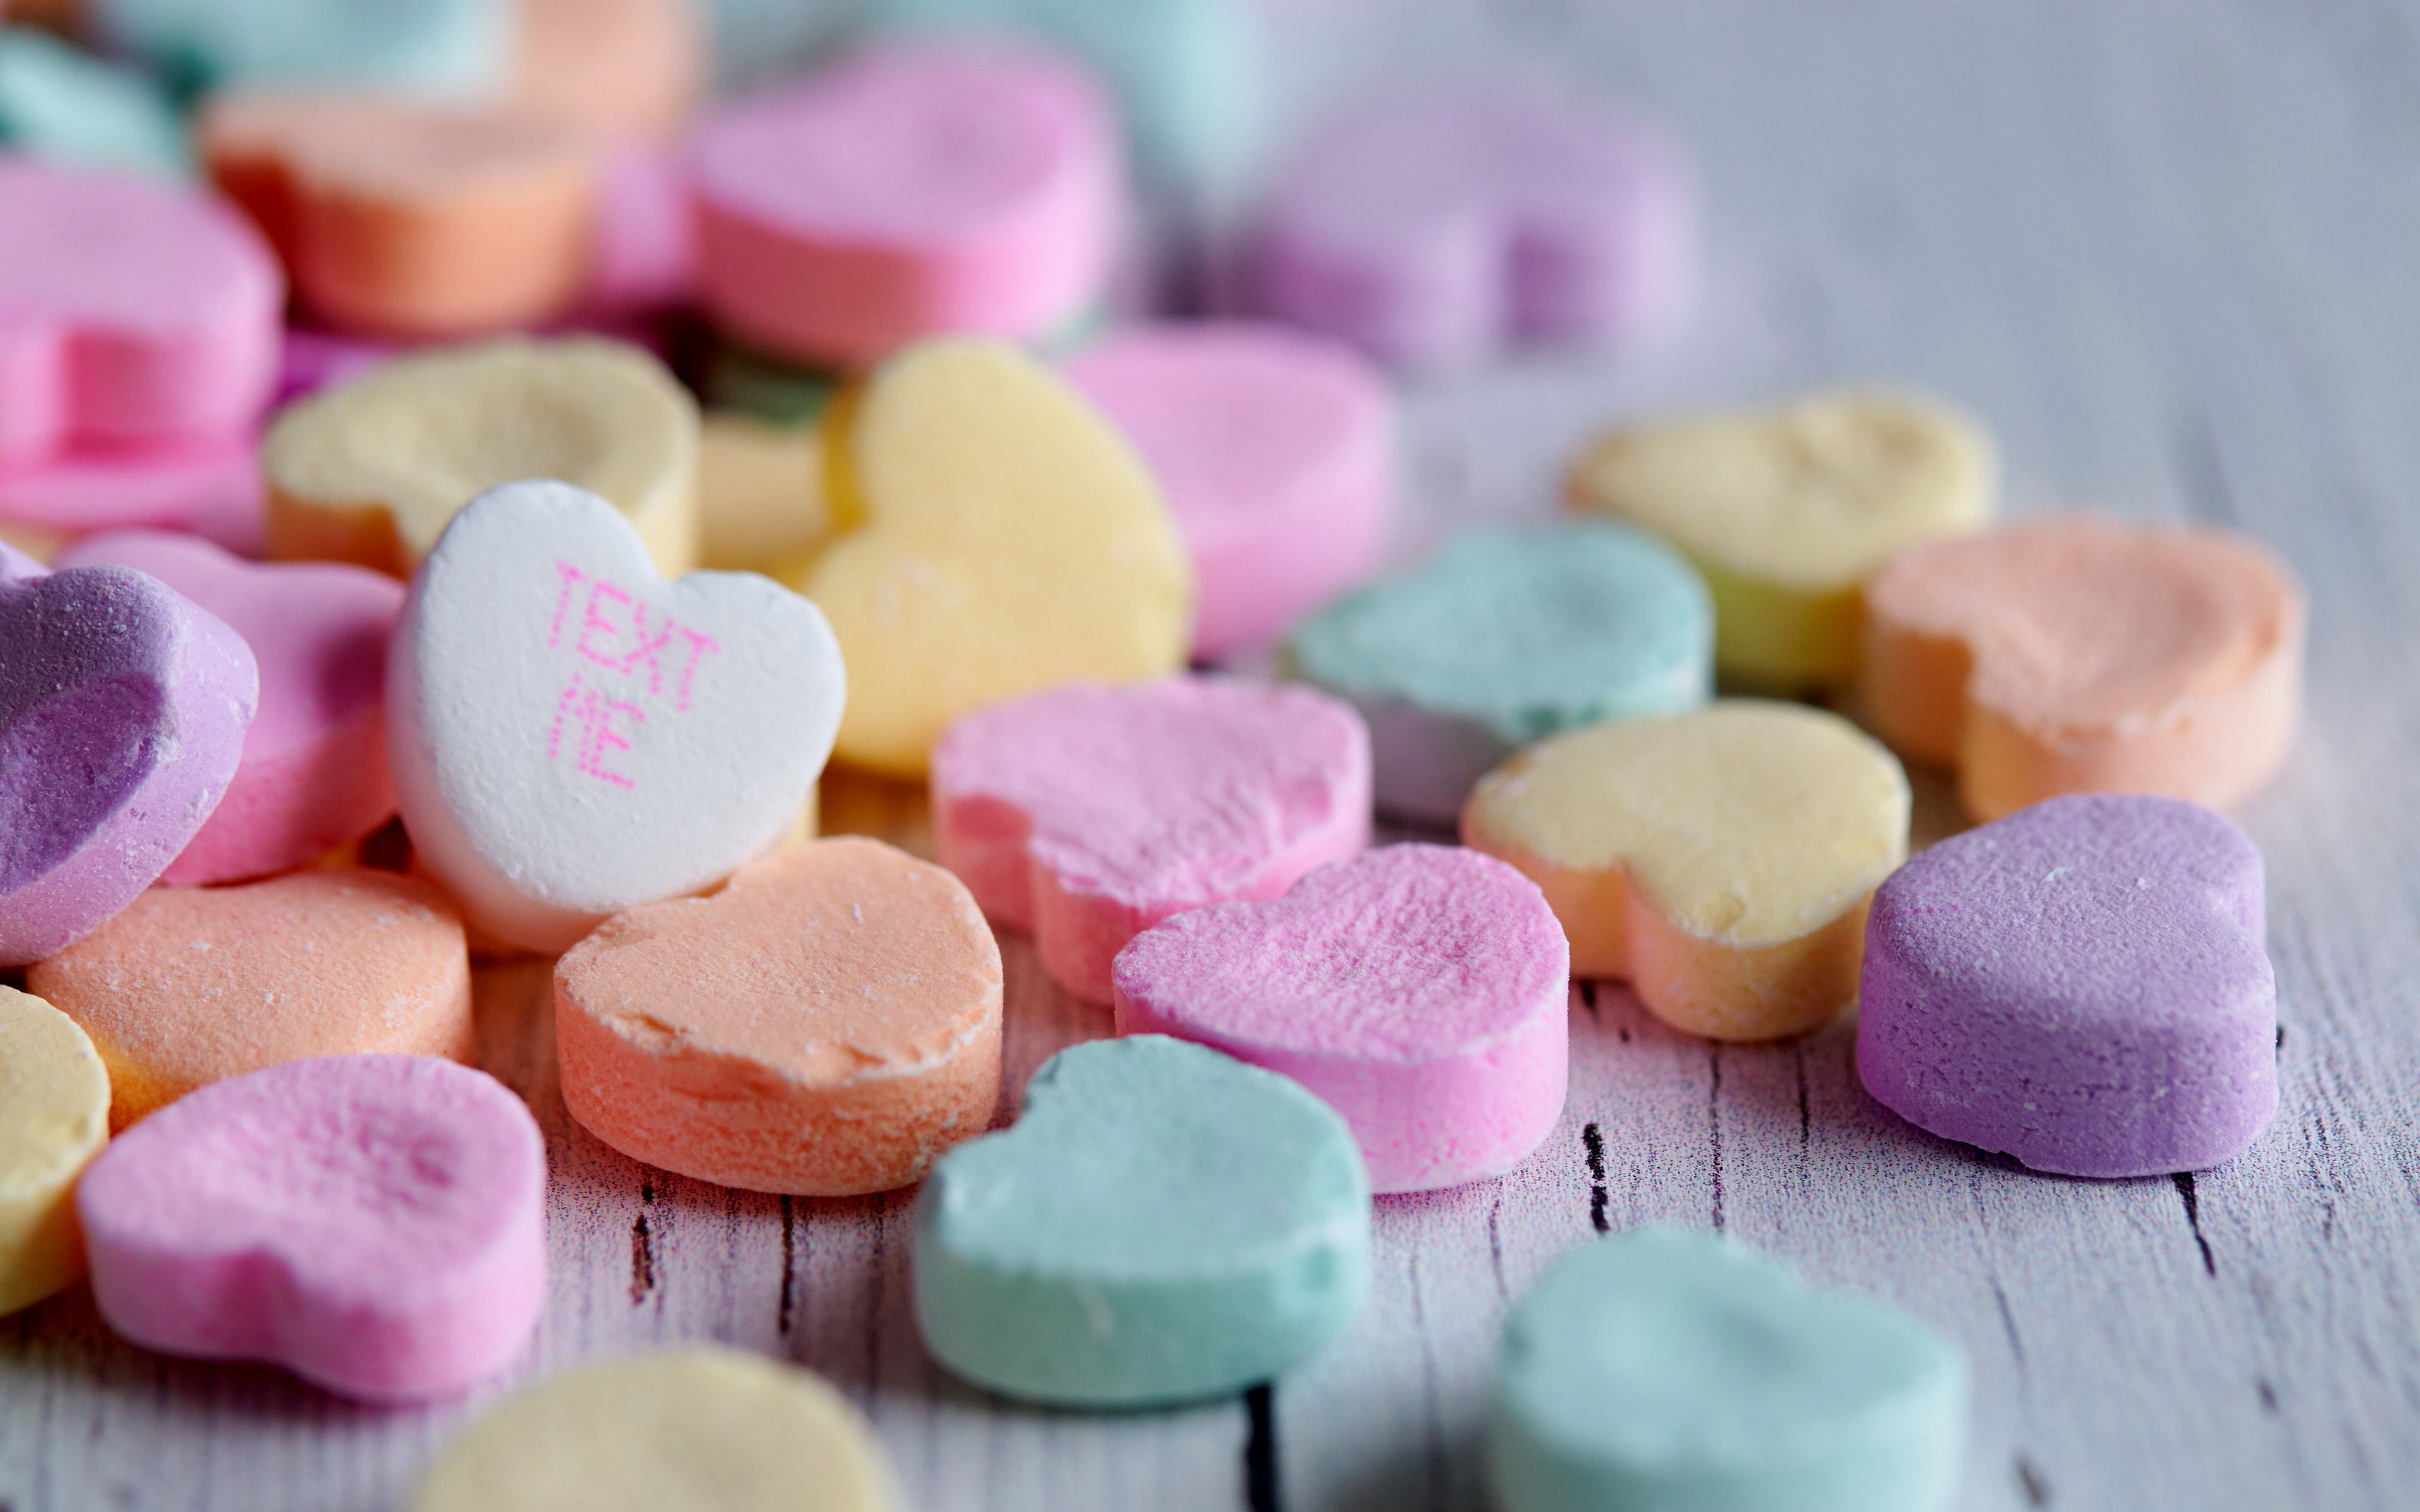 Sweethearts Conversation Hearts Are Back… But With a Catch